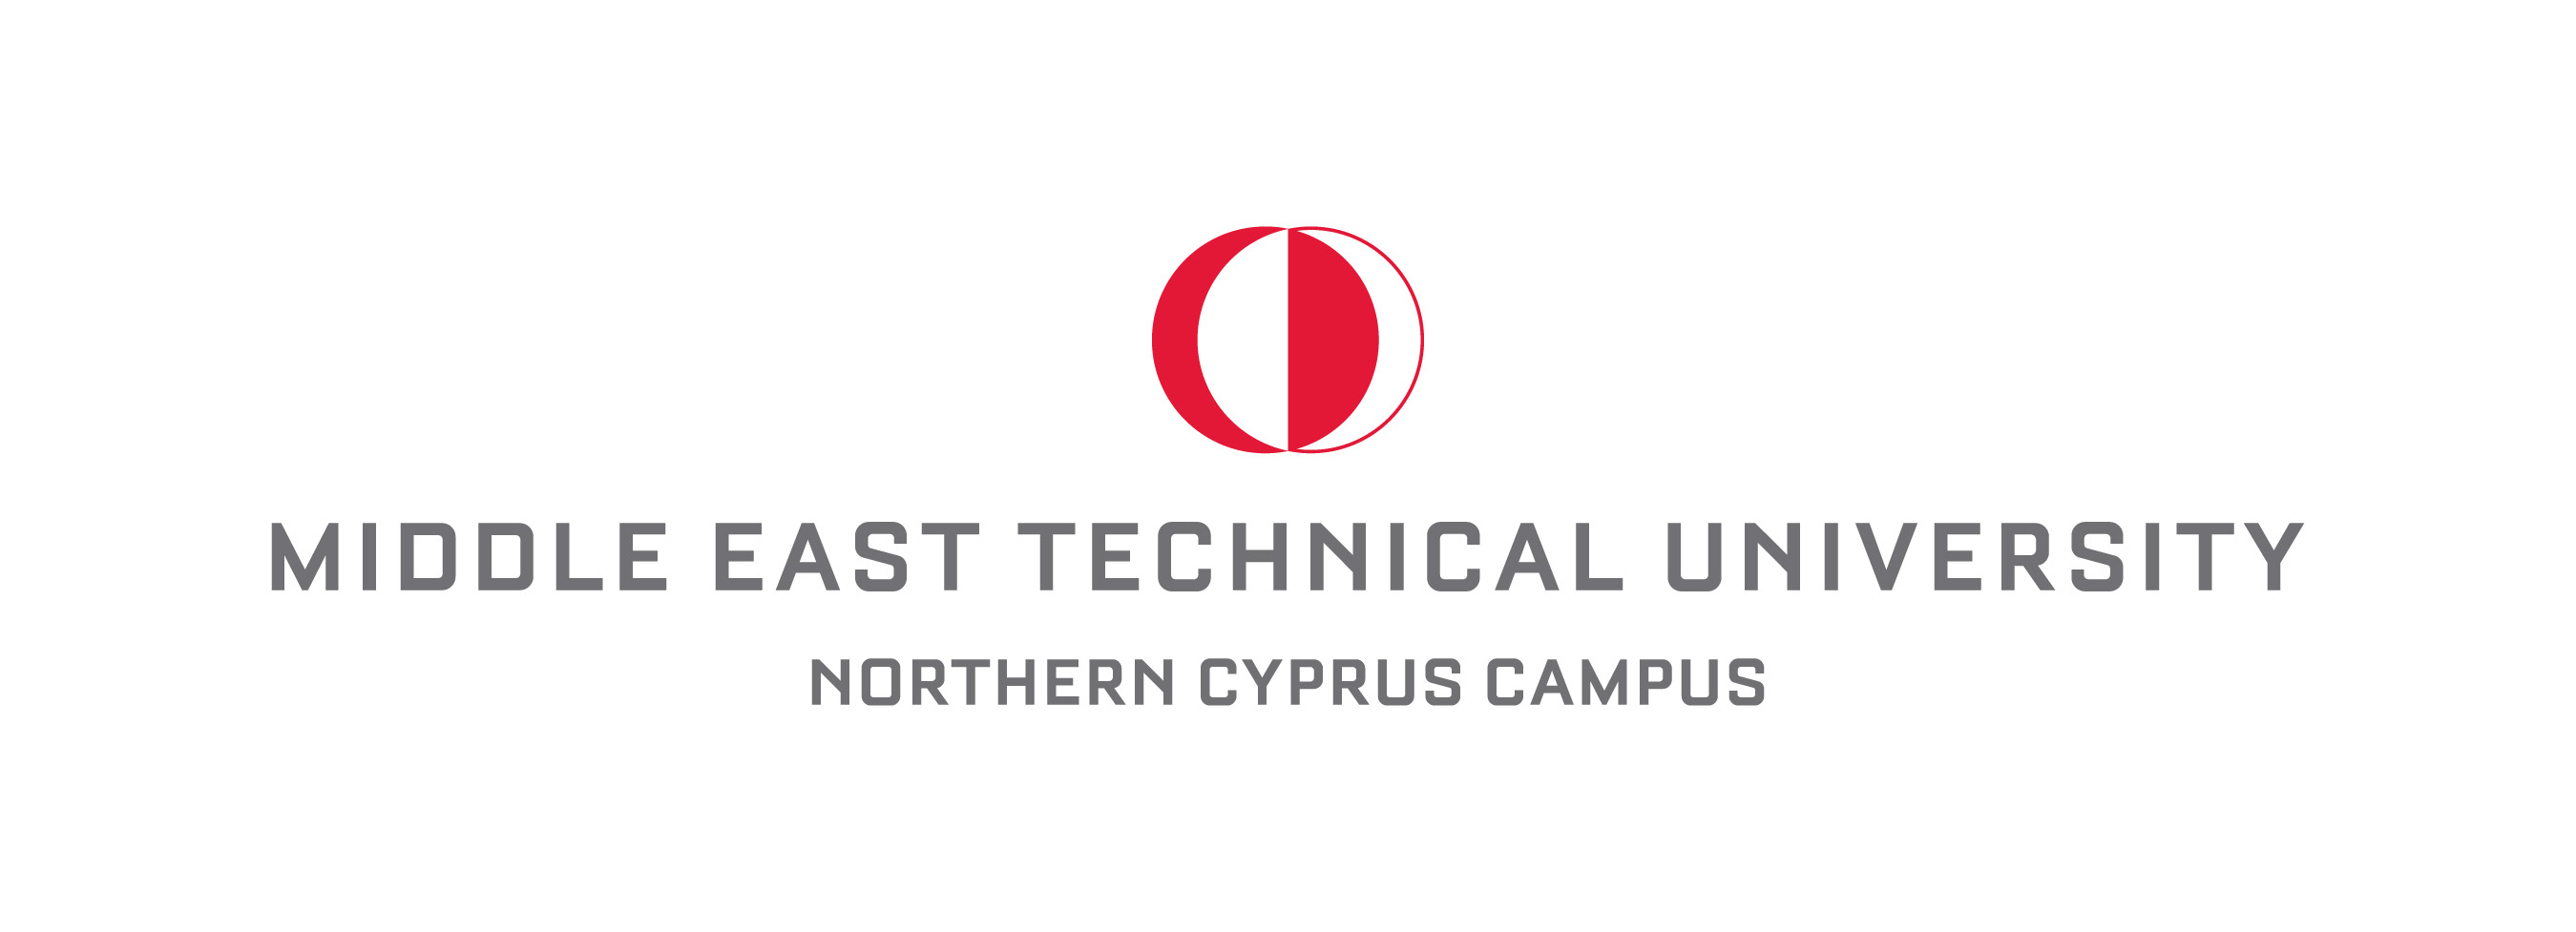 Middle East Technical University Northern Cyprus Campus Cyprus